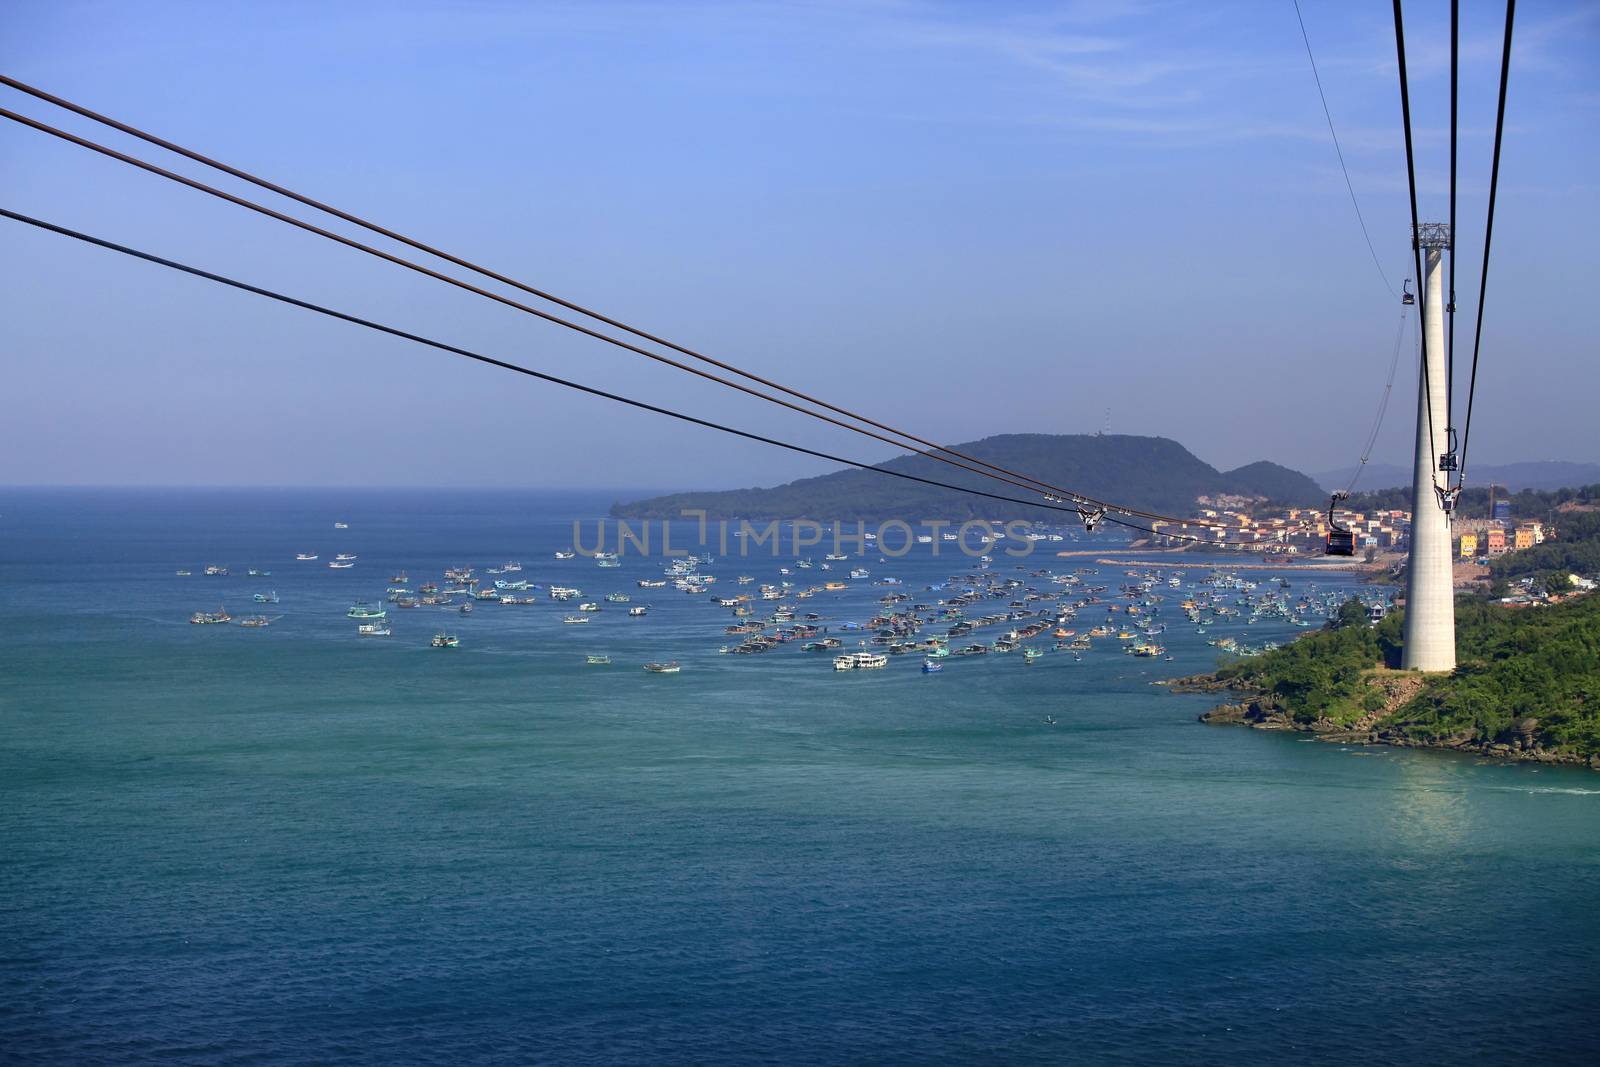 The longest non-stop three-wire cable car in the world is 8 km long, which is confirmed by the Guinness Book of Records. Vietnam, Phu Quoc